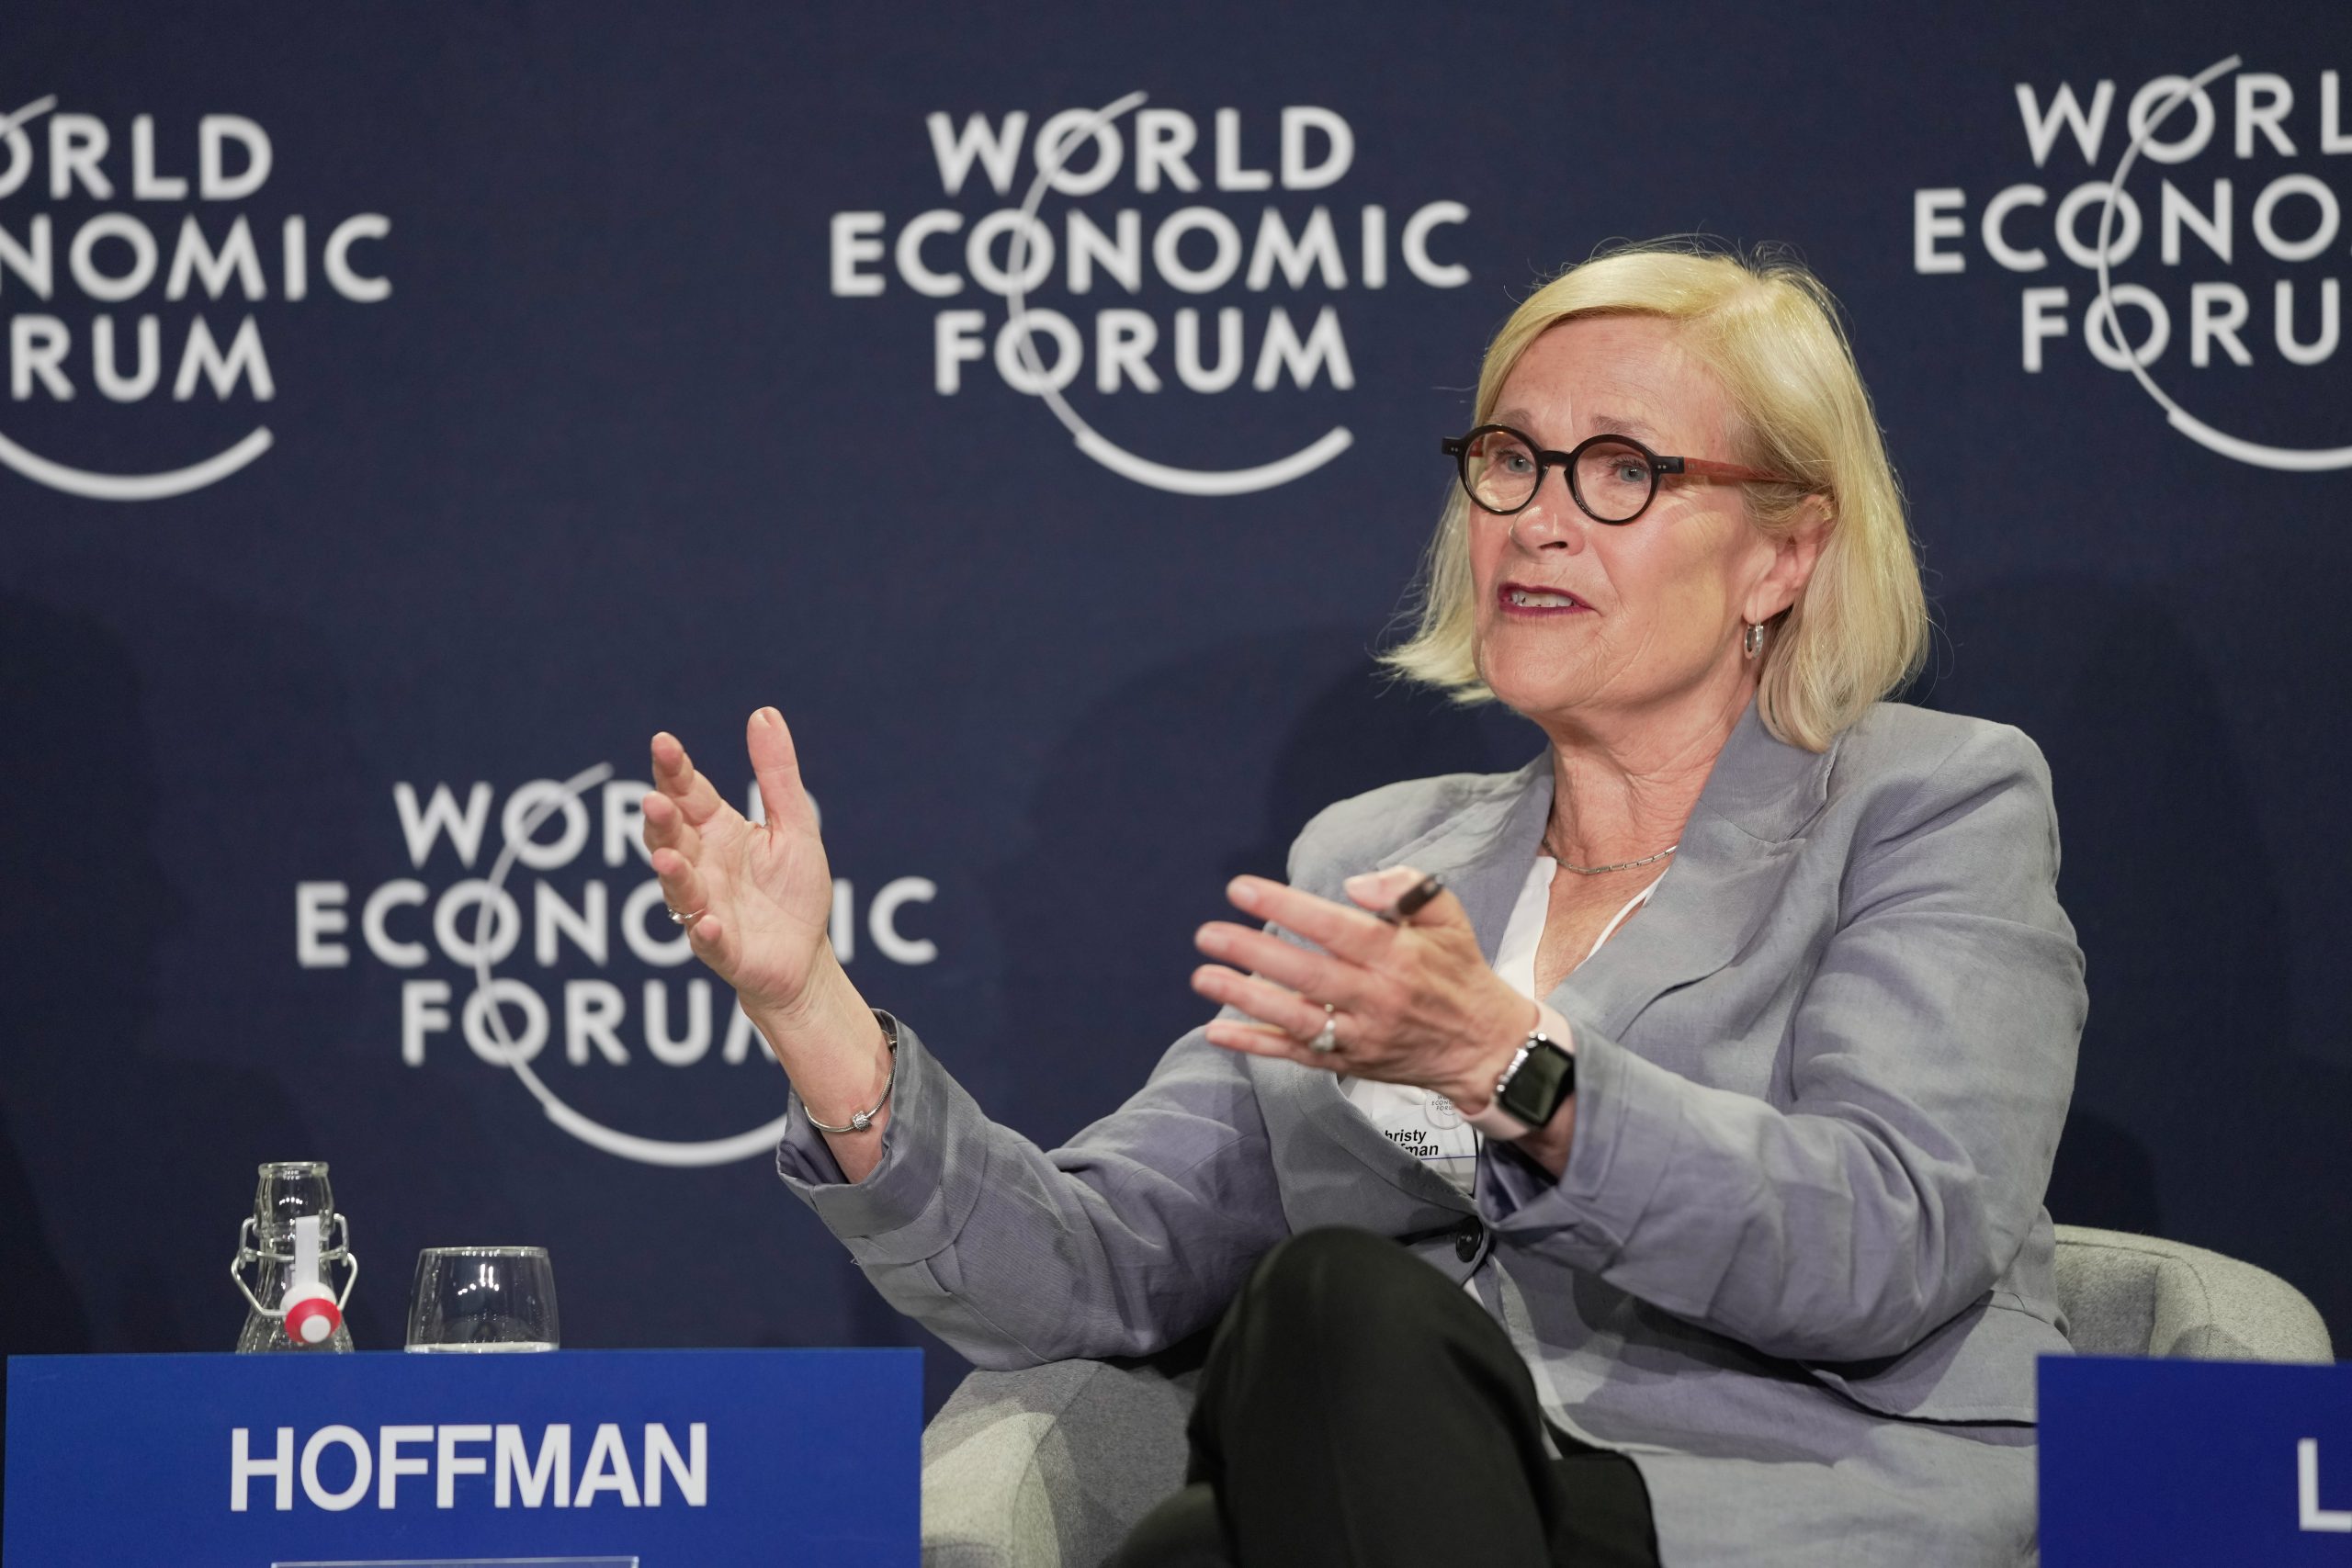 Collective bargaining for the common good – Christy Hoffman brings UNI’s message to World Economic Forum in Davos 